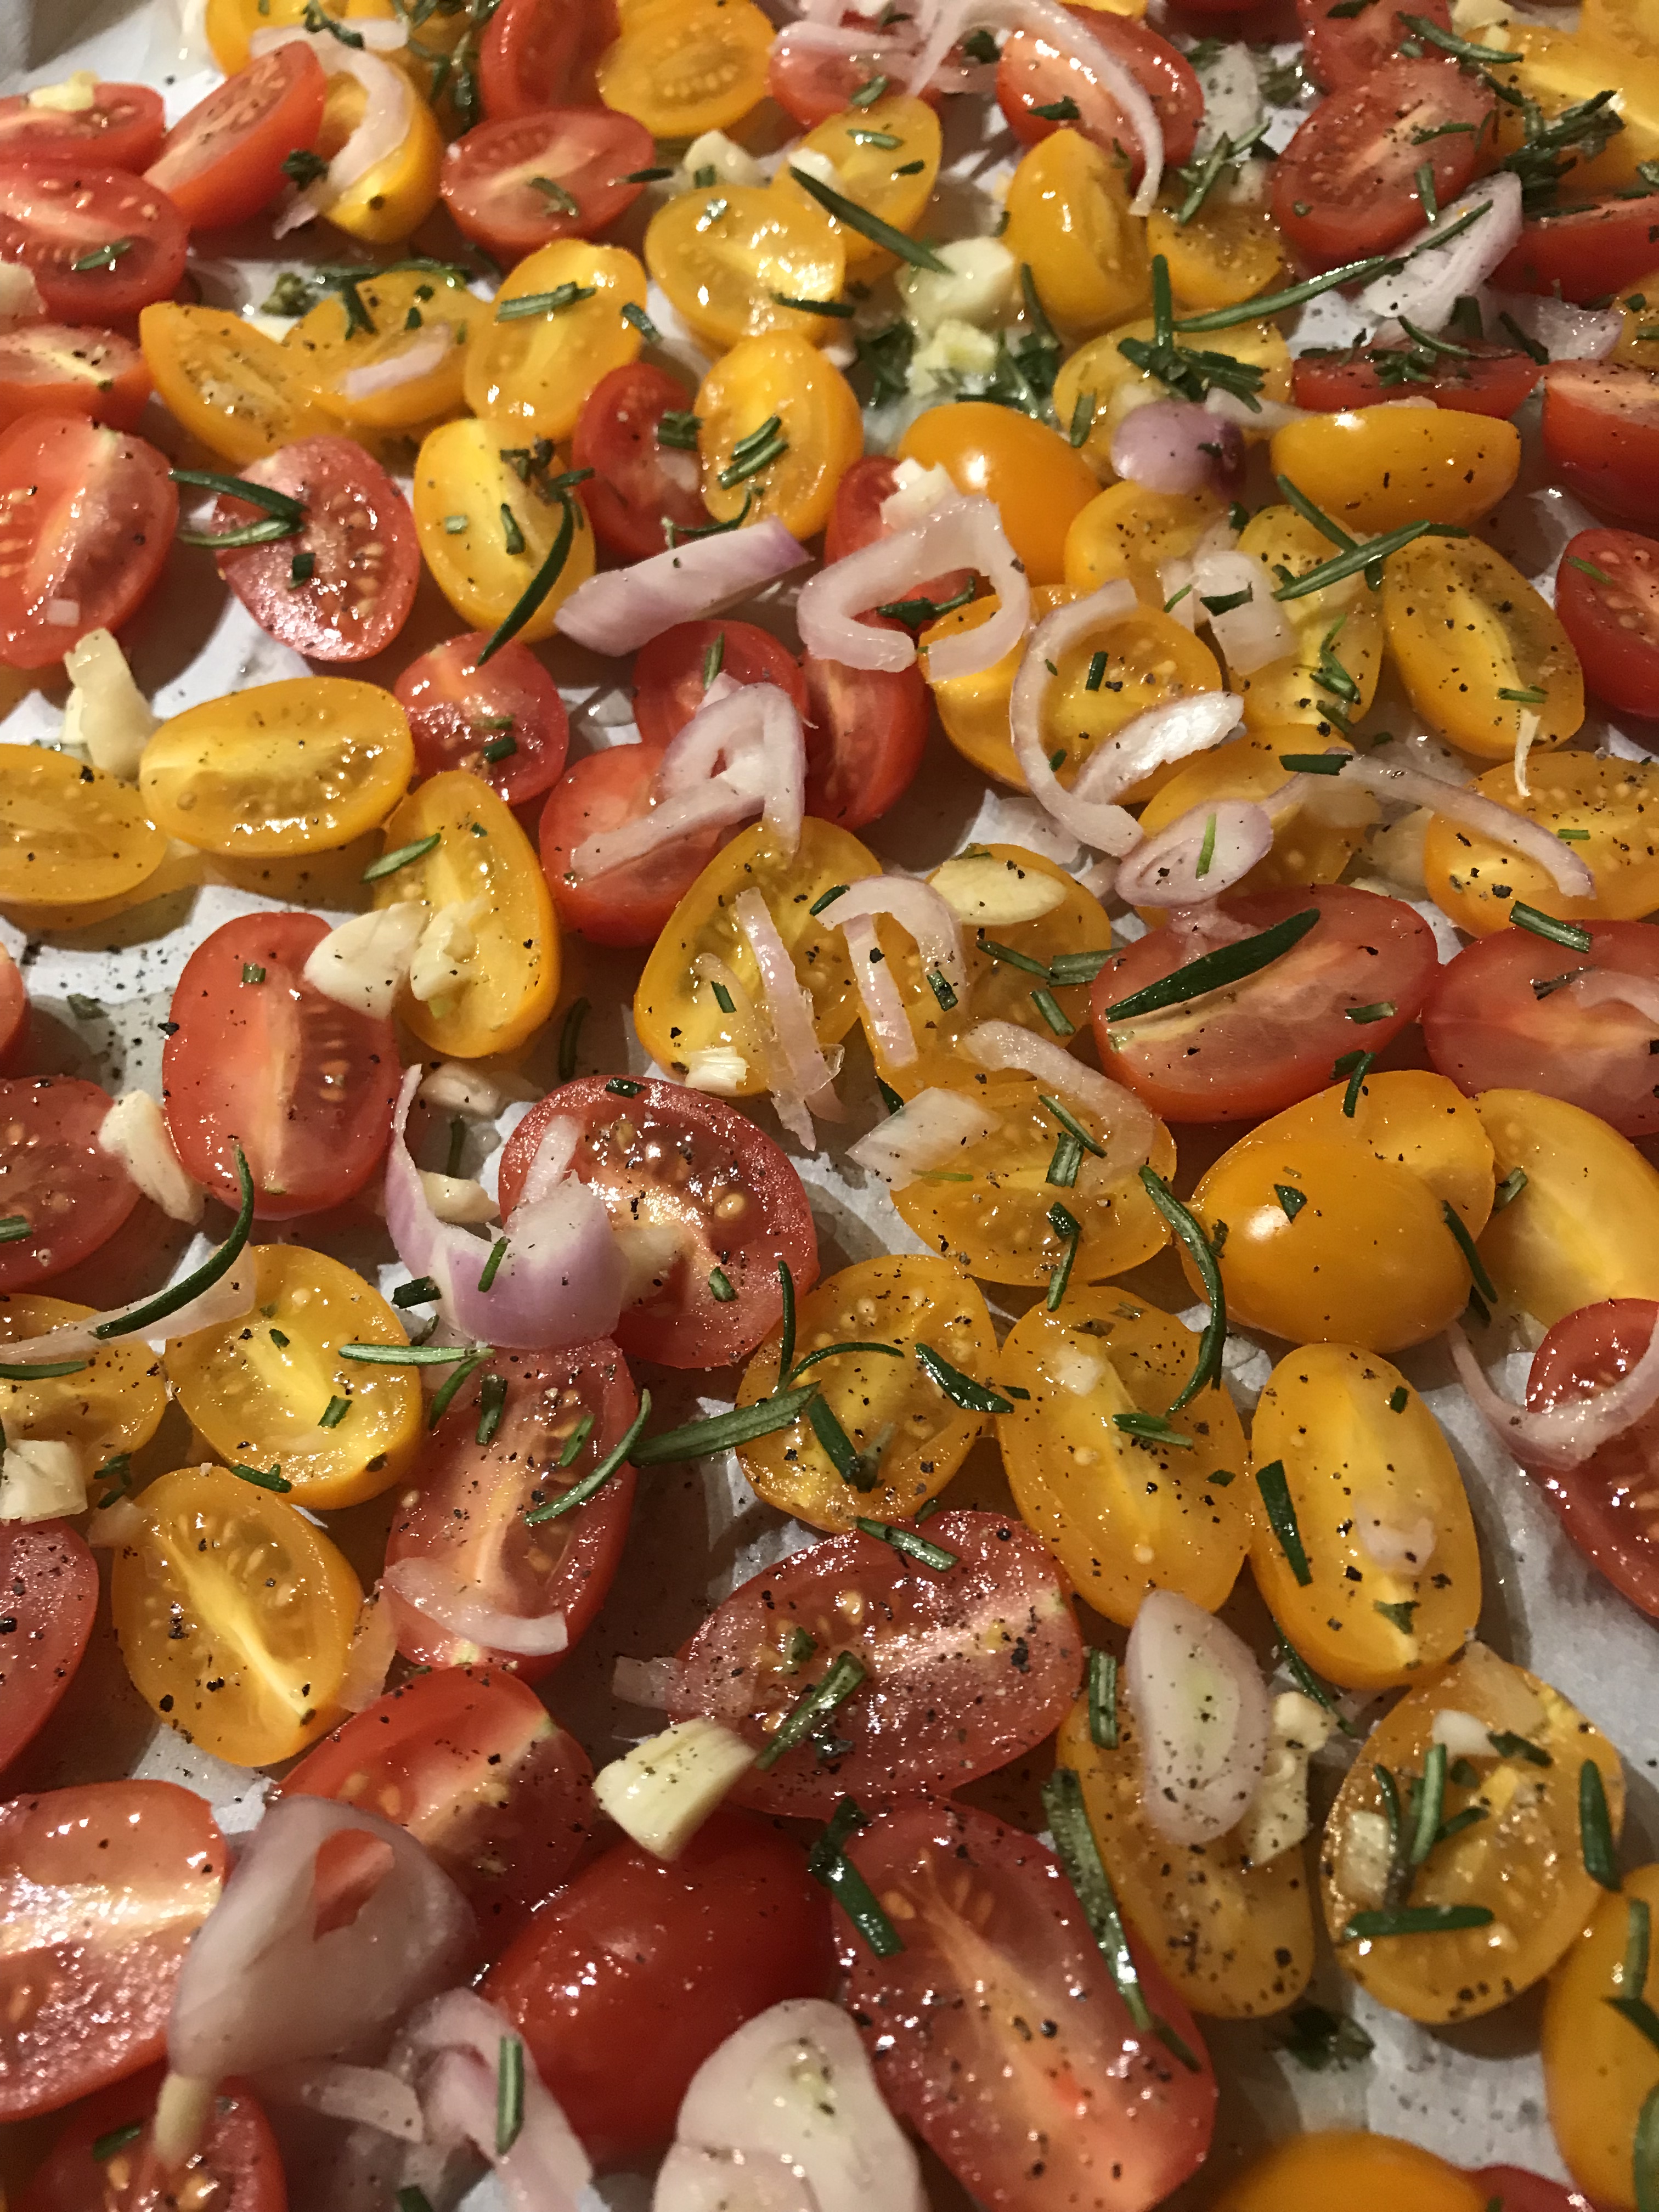 Roasted tomatoes pic 1 - Courtney Schmidt